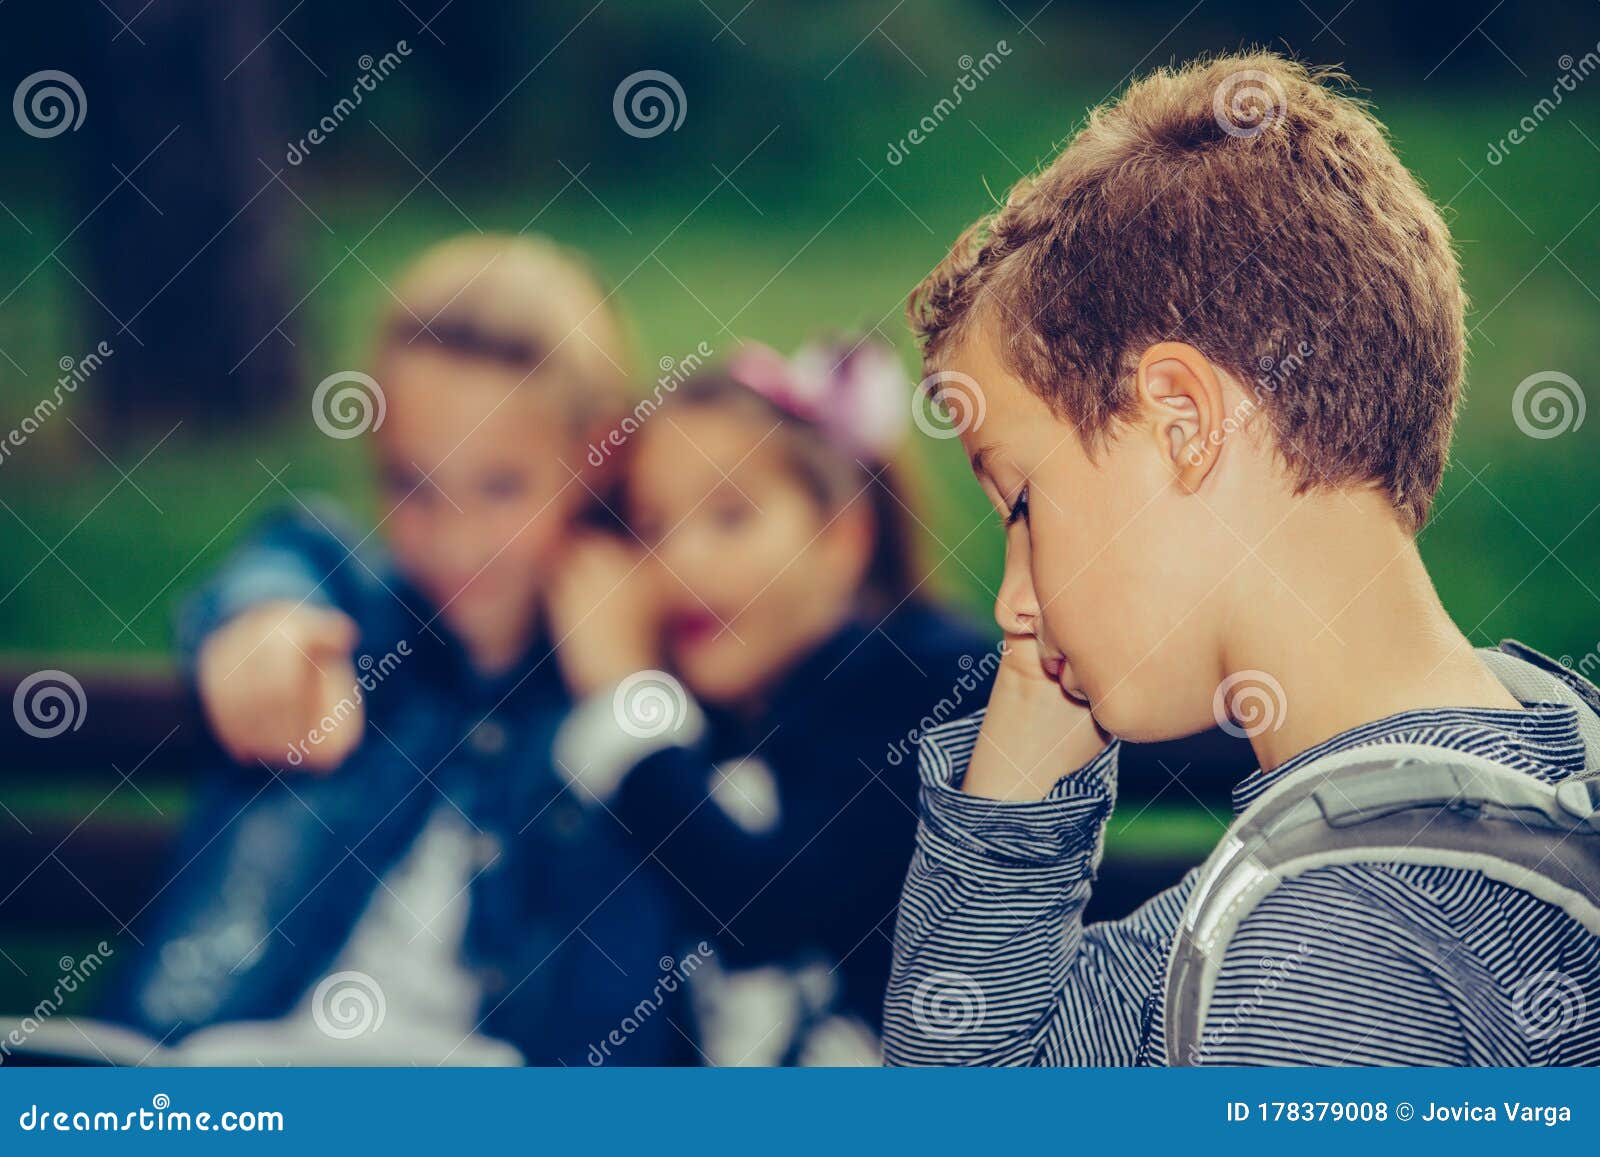 Sad Boy Feeling Left Out, Teased and Bullied by His Classmates ...